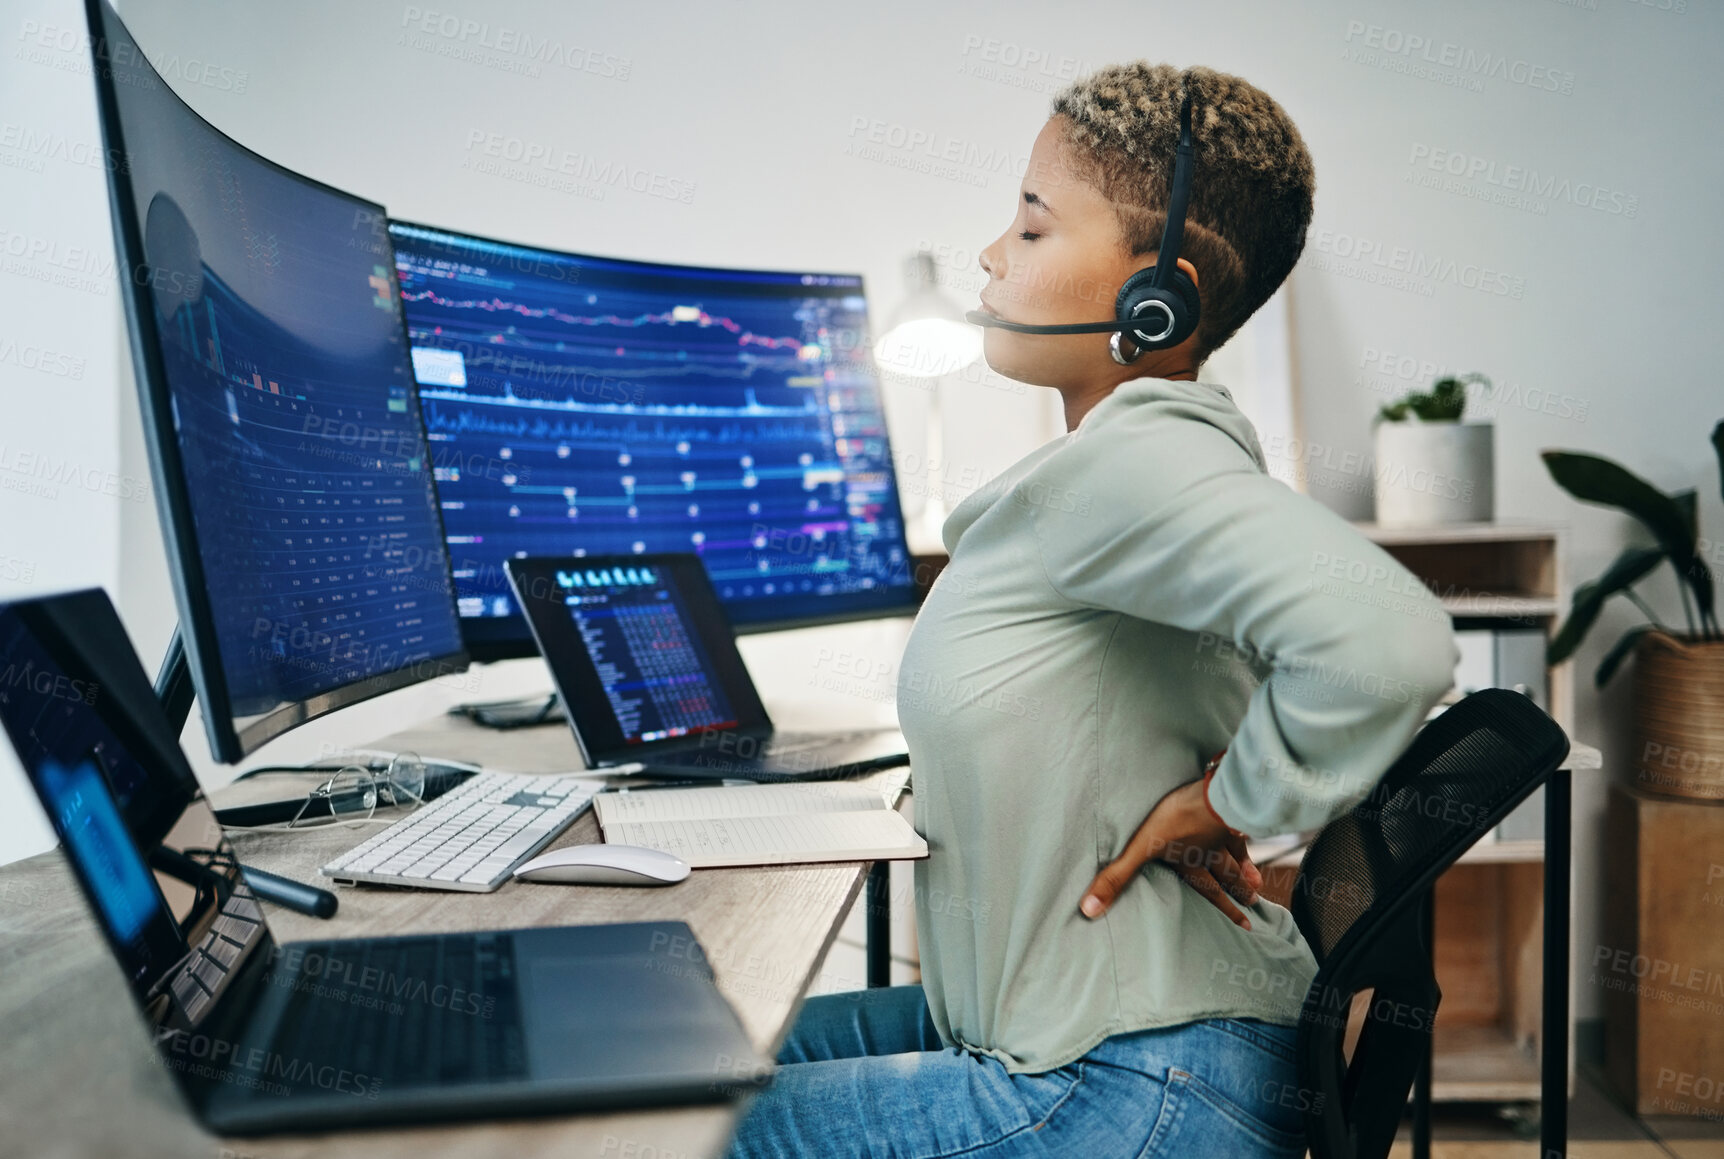 Buy stock photo Back pain, call center and woman working on computer with stress, fatigue and overworked in an office with strain. Burnout, tired and telemarketing employee with pressure from crisis or injury